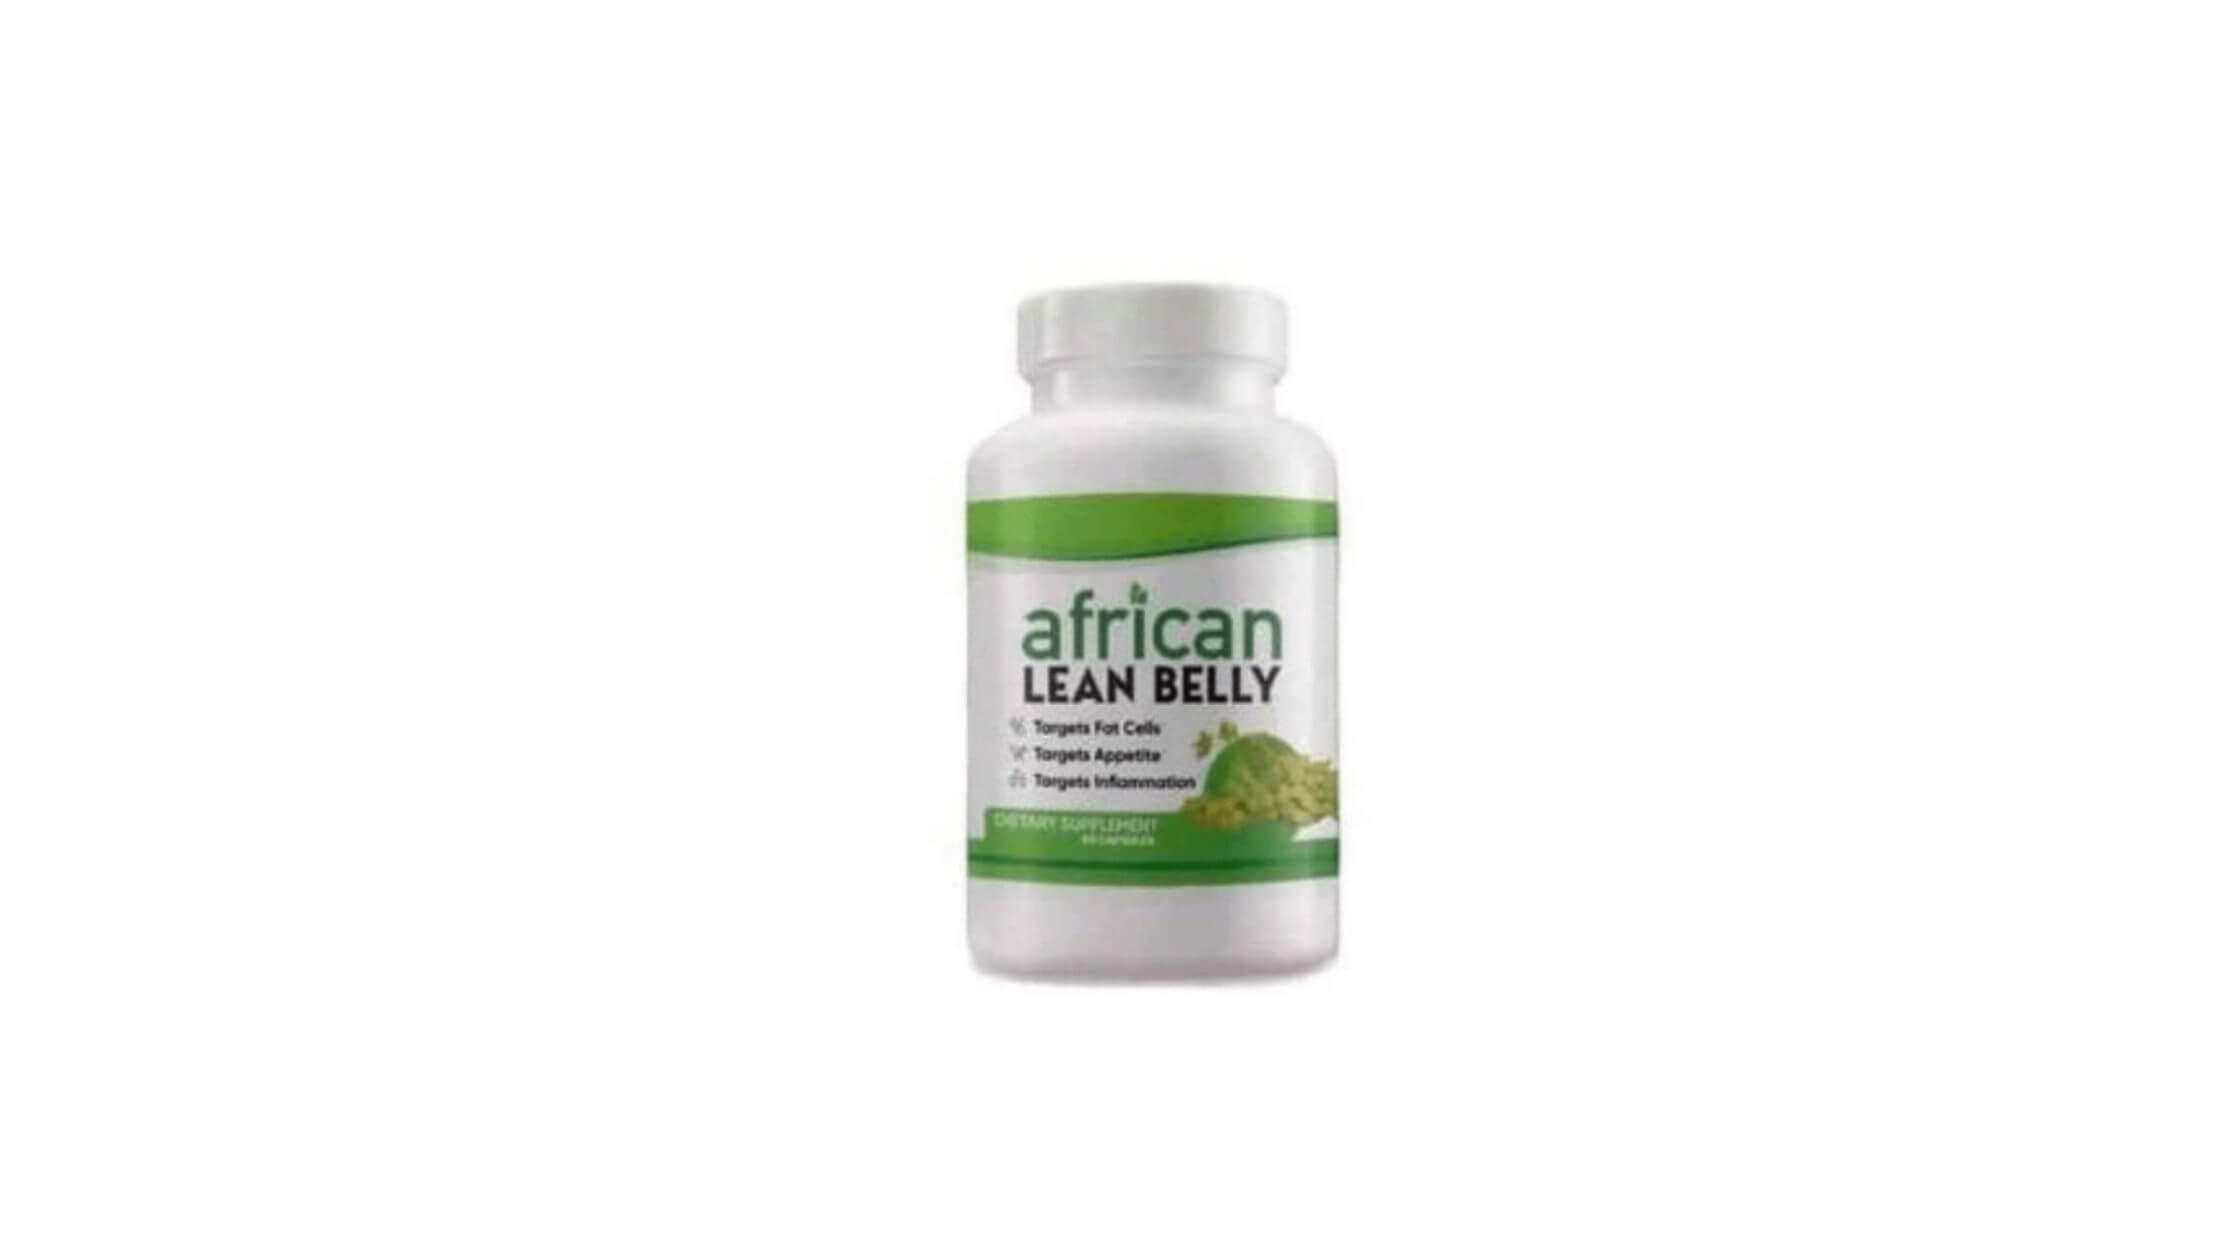 African Lean Belly Reviews